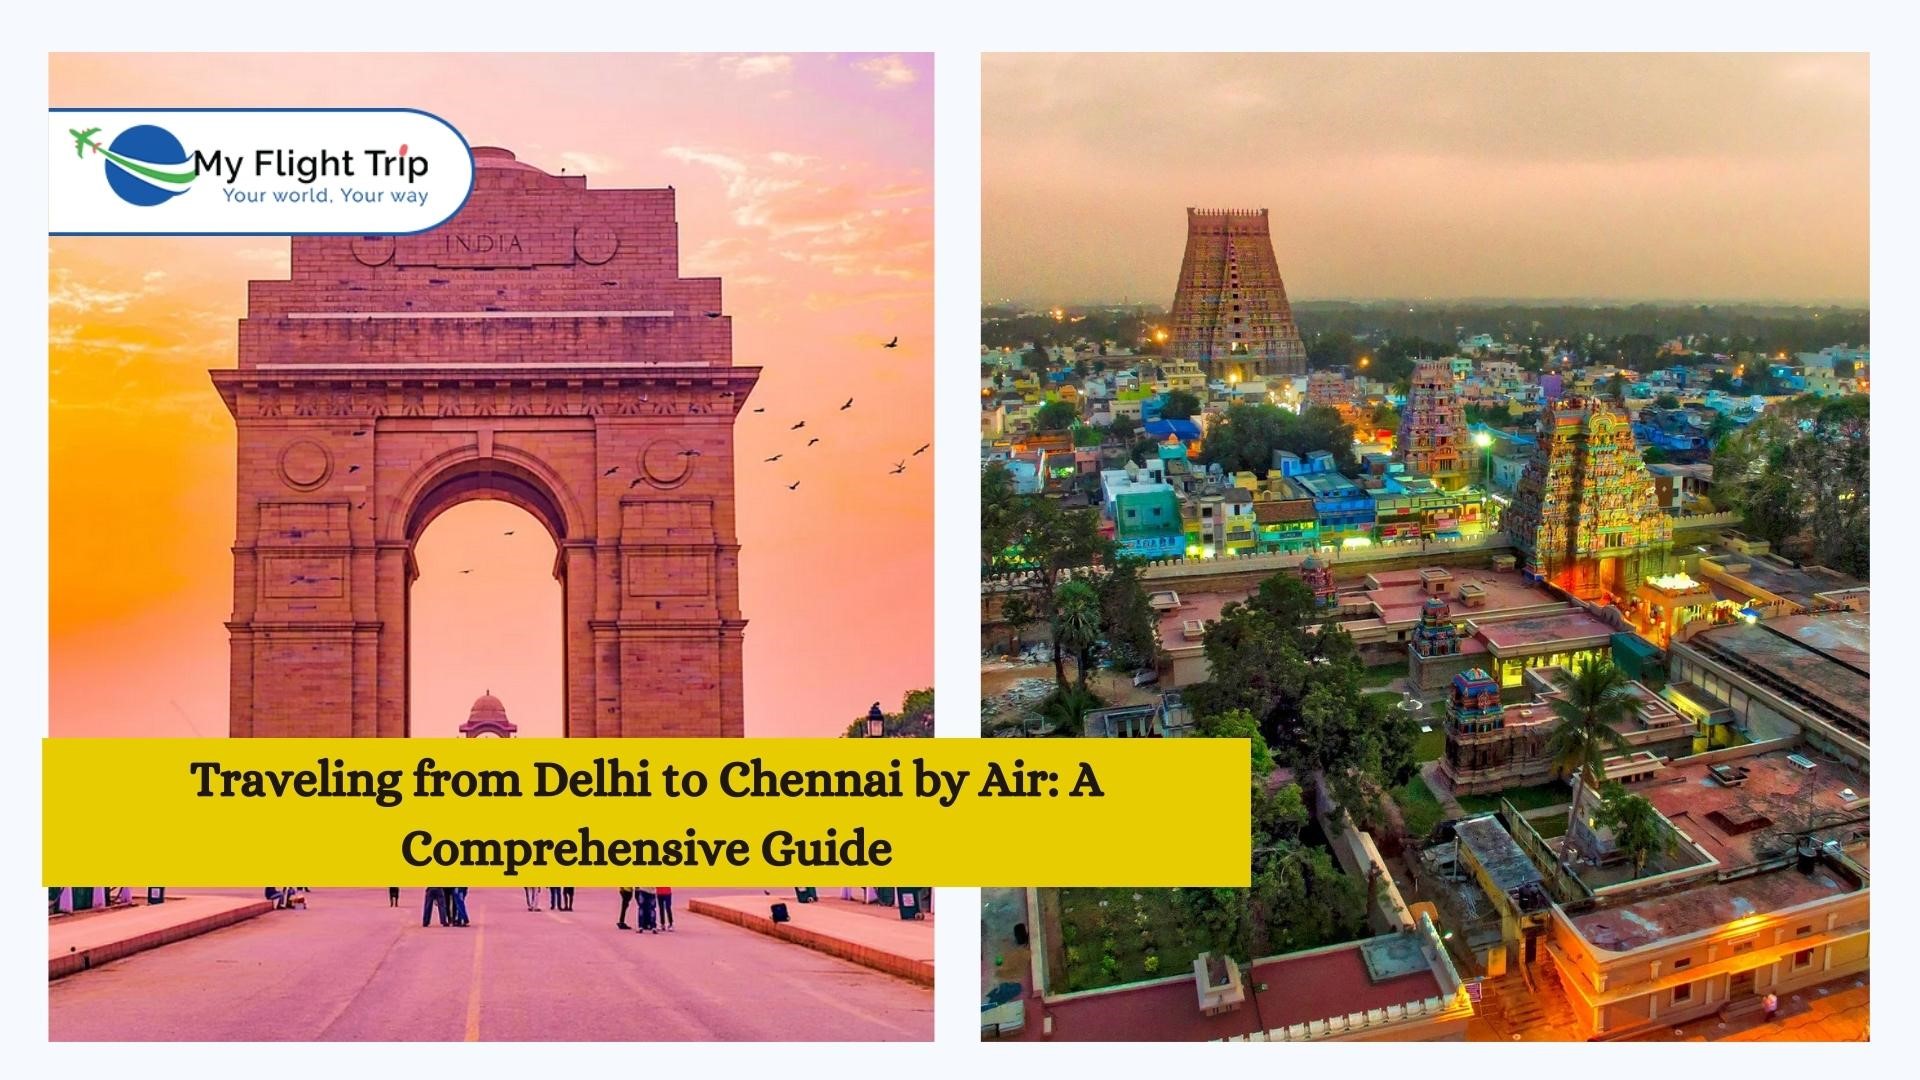 Traveling from Delhi to Chennai by Air: A Comprehensive Guide